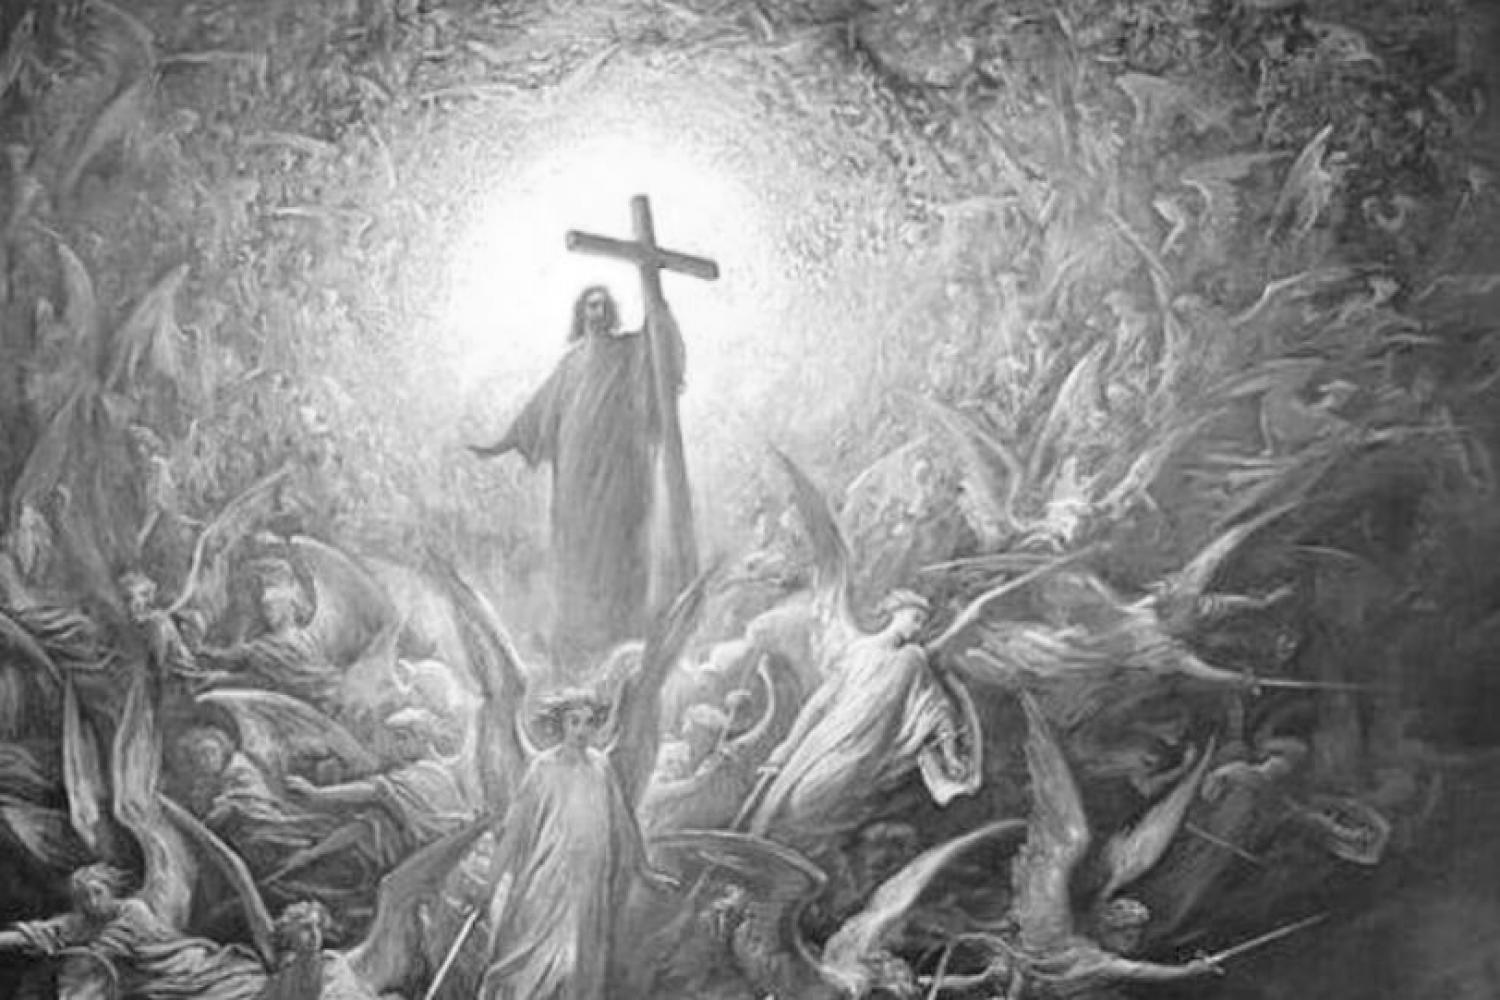 "The Triumph of Christianity over Paganism," by Gustave Dore